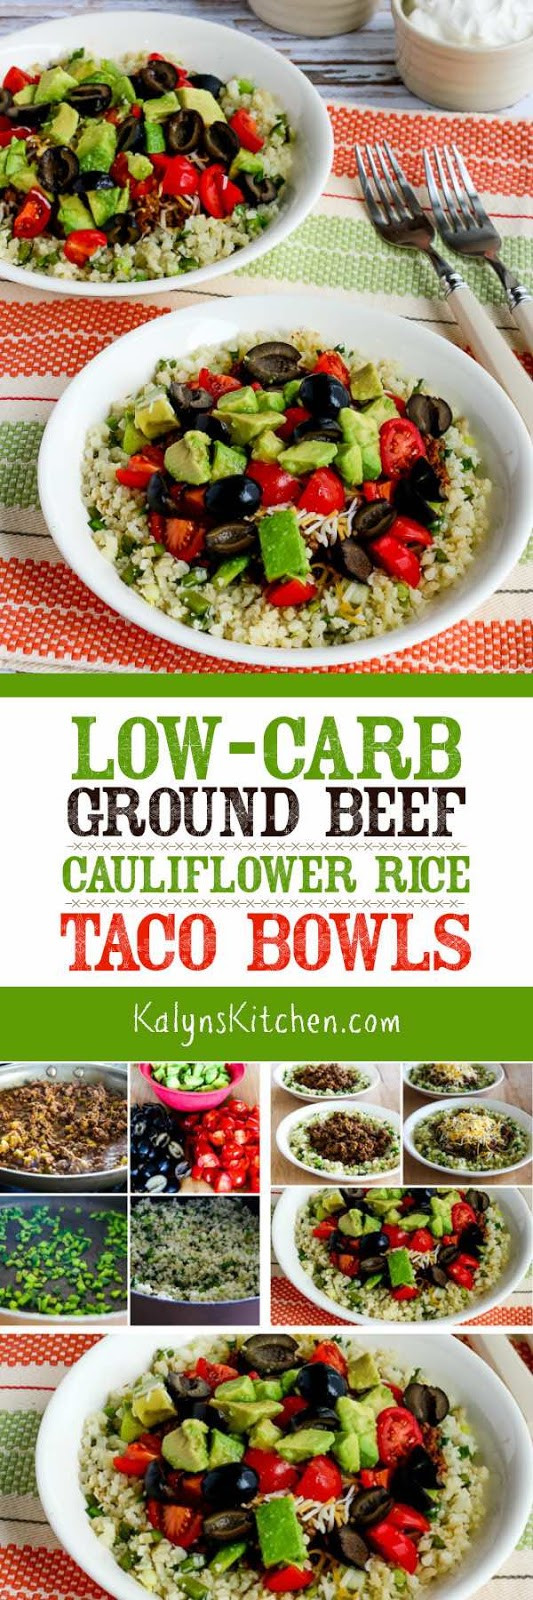 Ground Beef Low Carb
 Low Carb Ground Beef Cauliflower Rice Taco Bowls Video